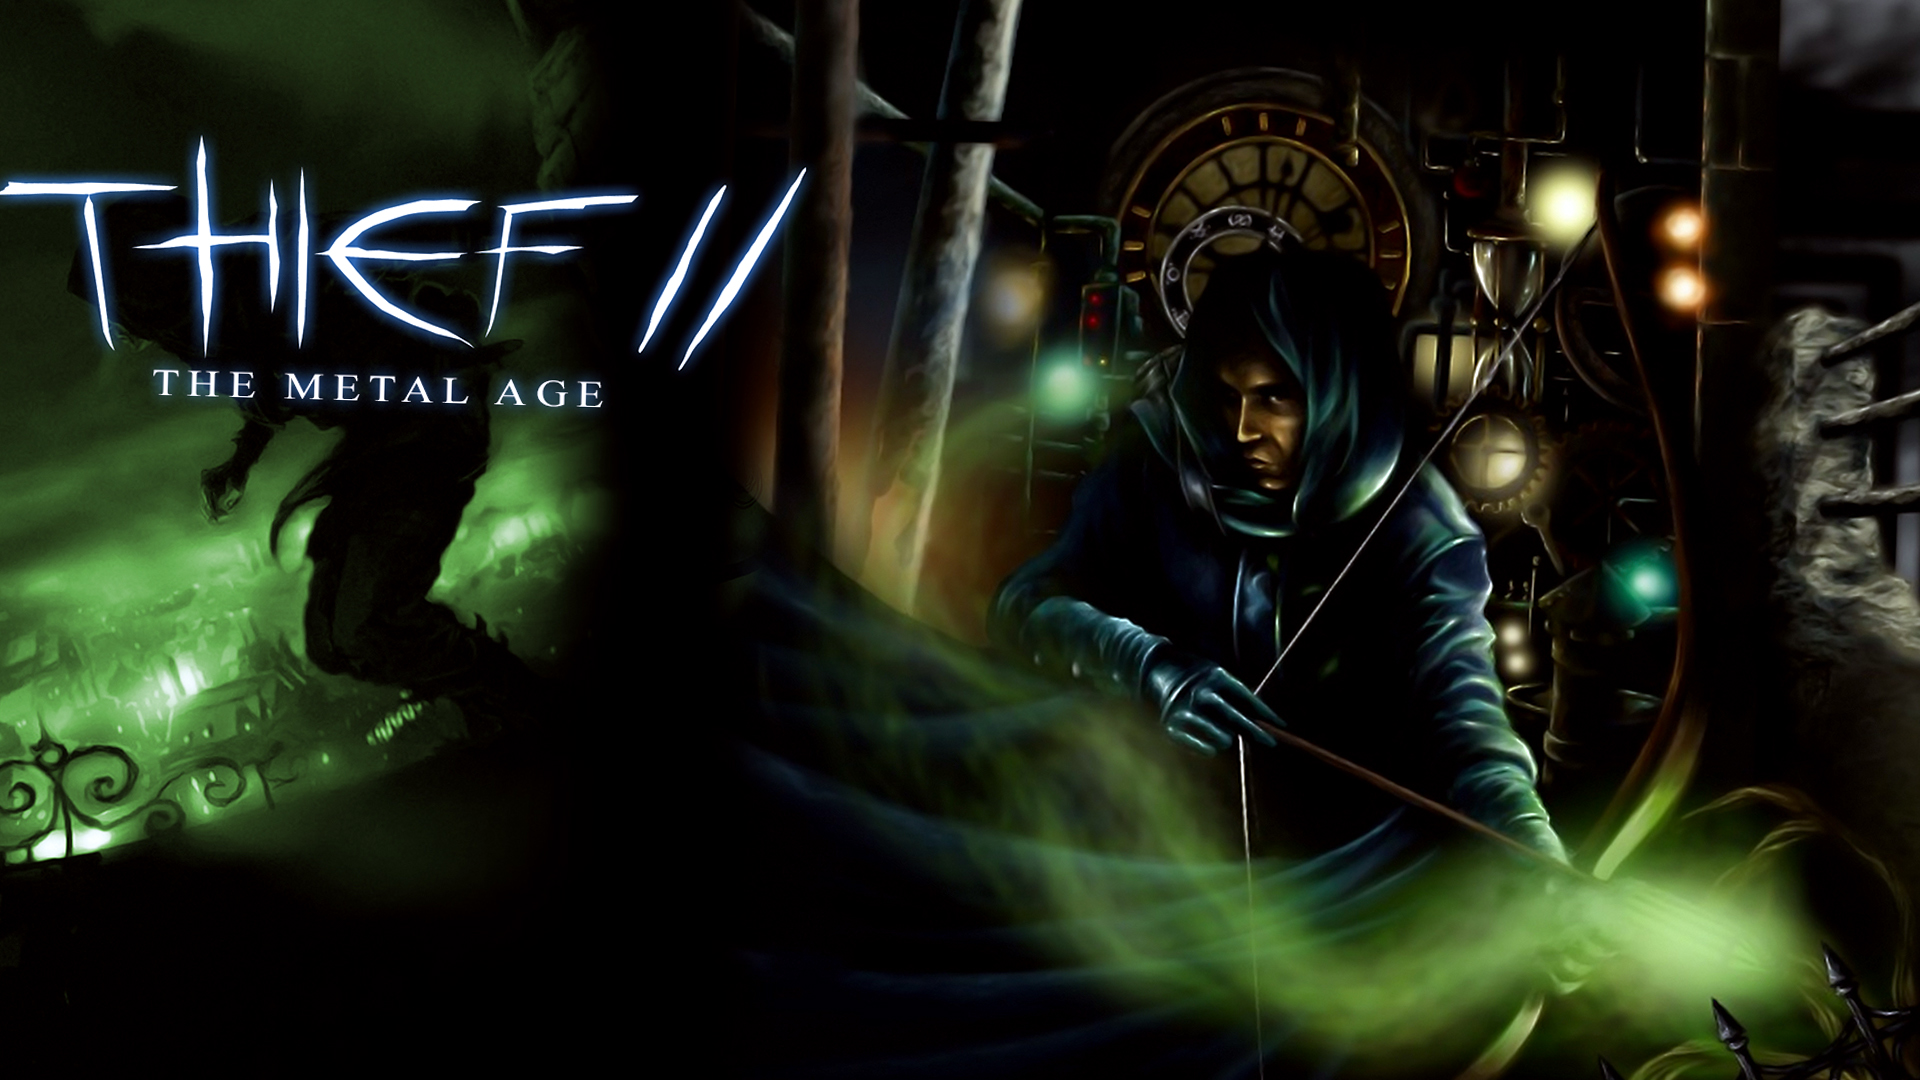 Thief 2 Cover Game Wallpaper